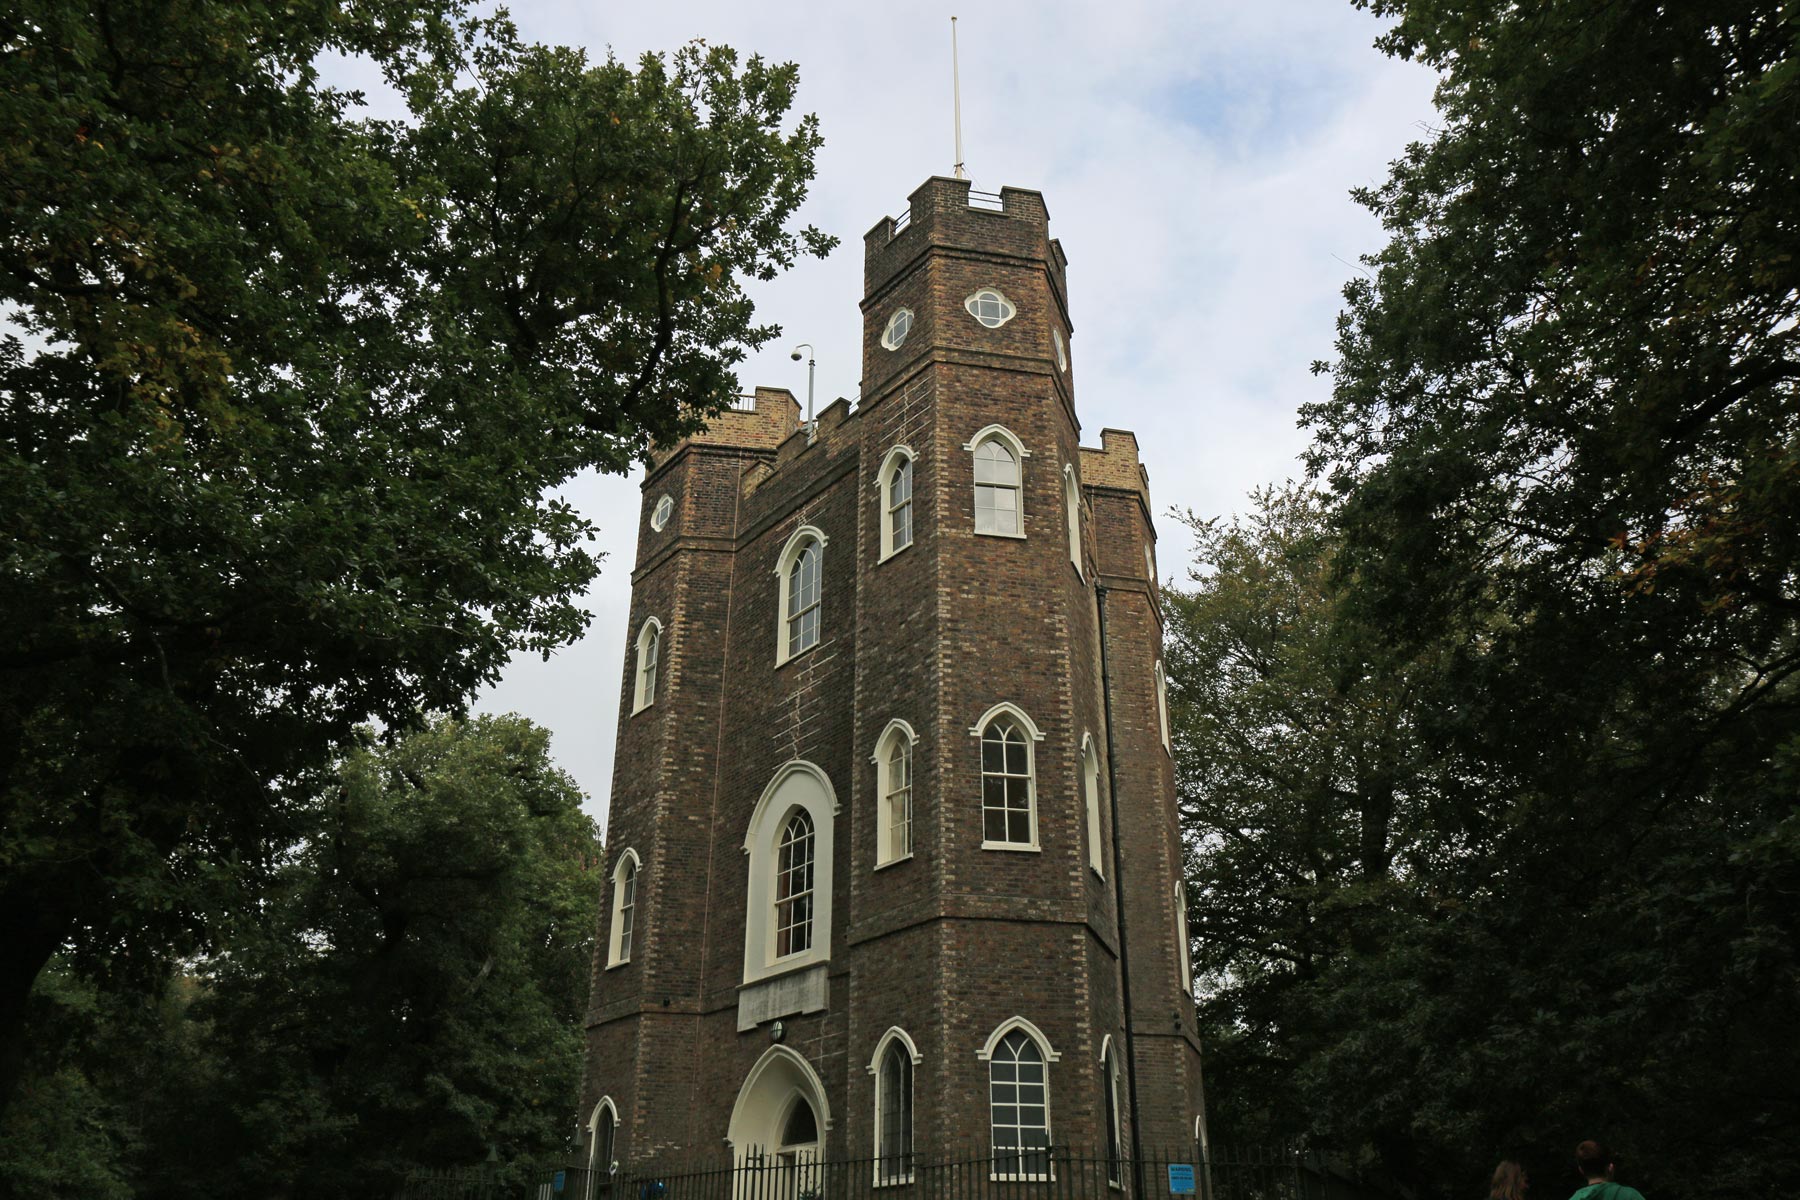 Severndroog Castle reopens this Sunday